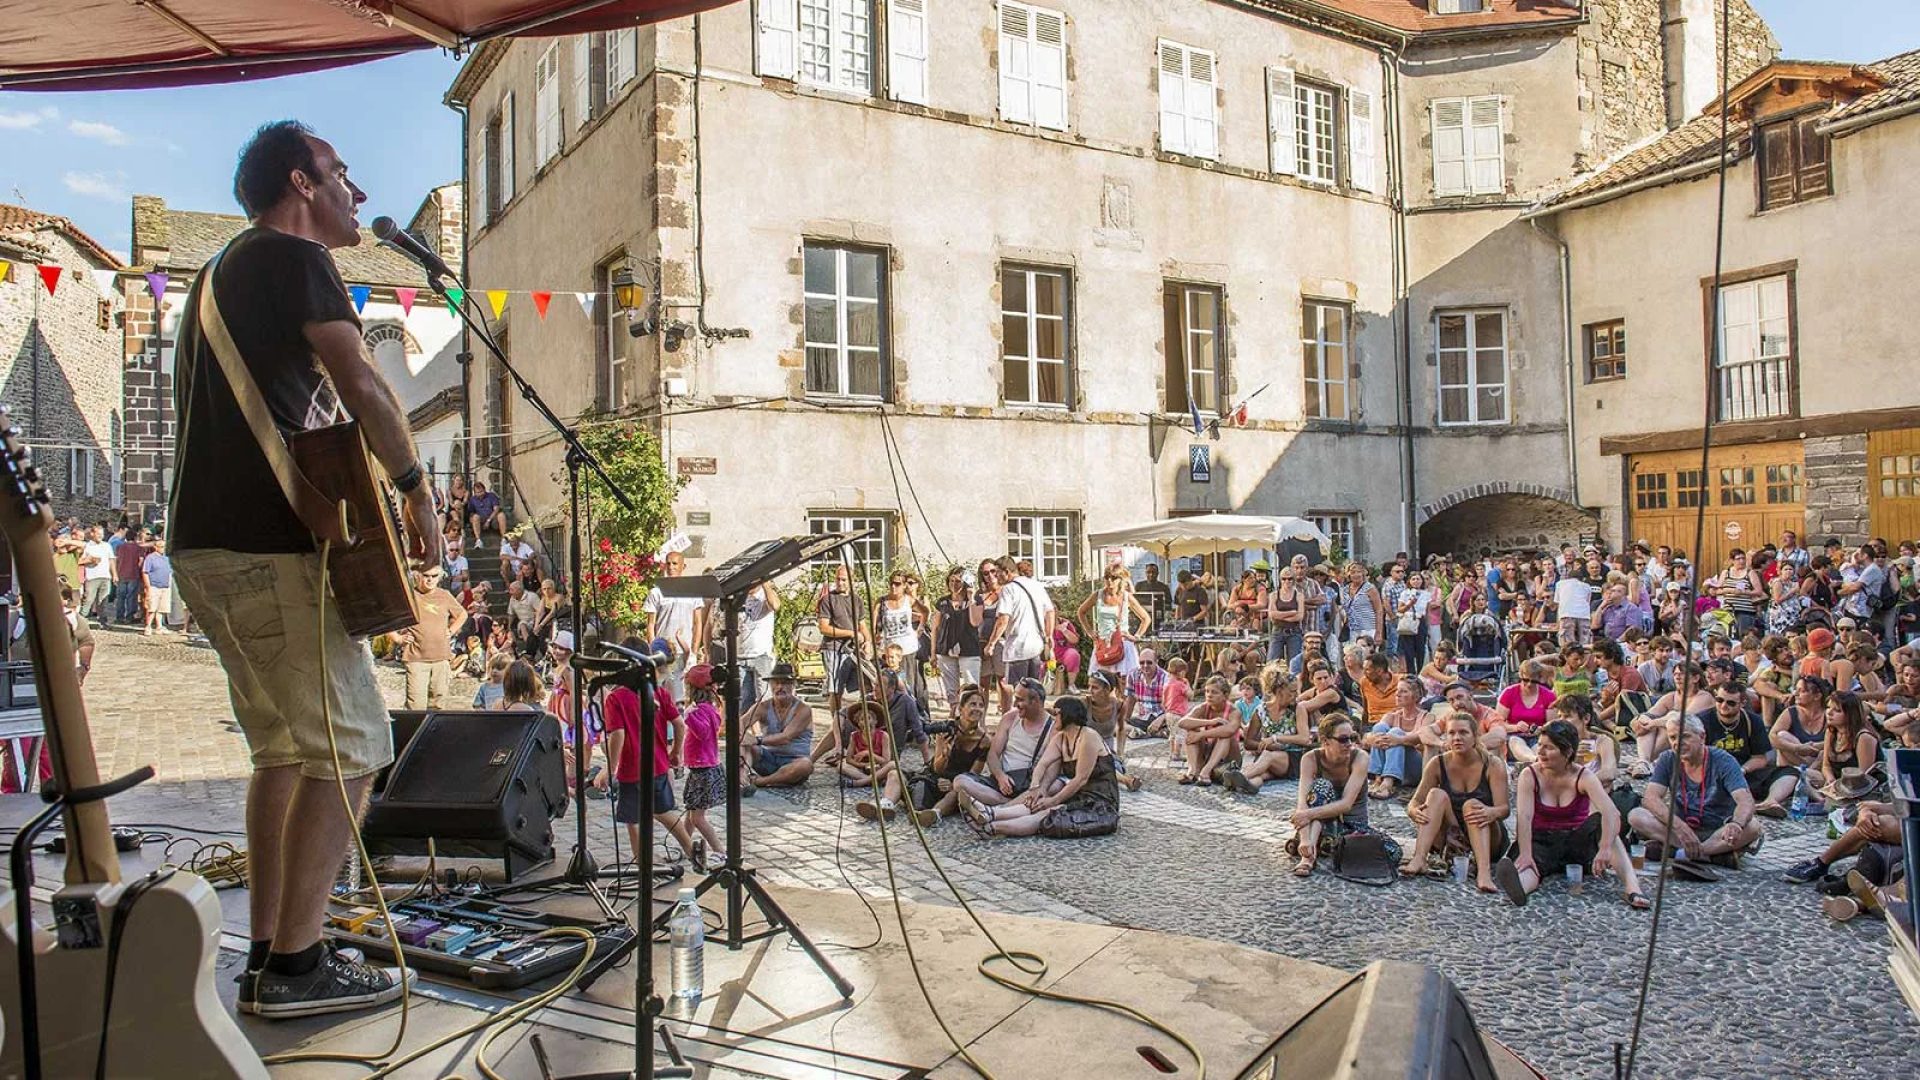 A singer performs on an outdoor stage in front of a crowd of people seated at the Apéros musique de Blesle in Haute-Loire, Auvergne